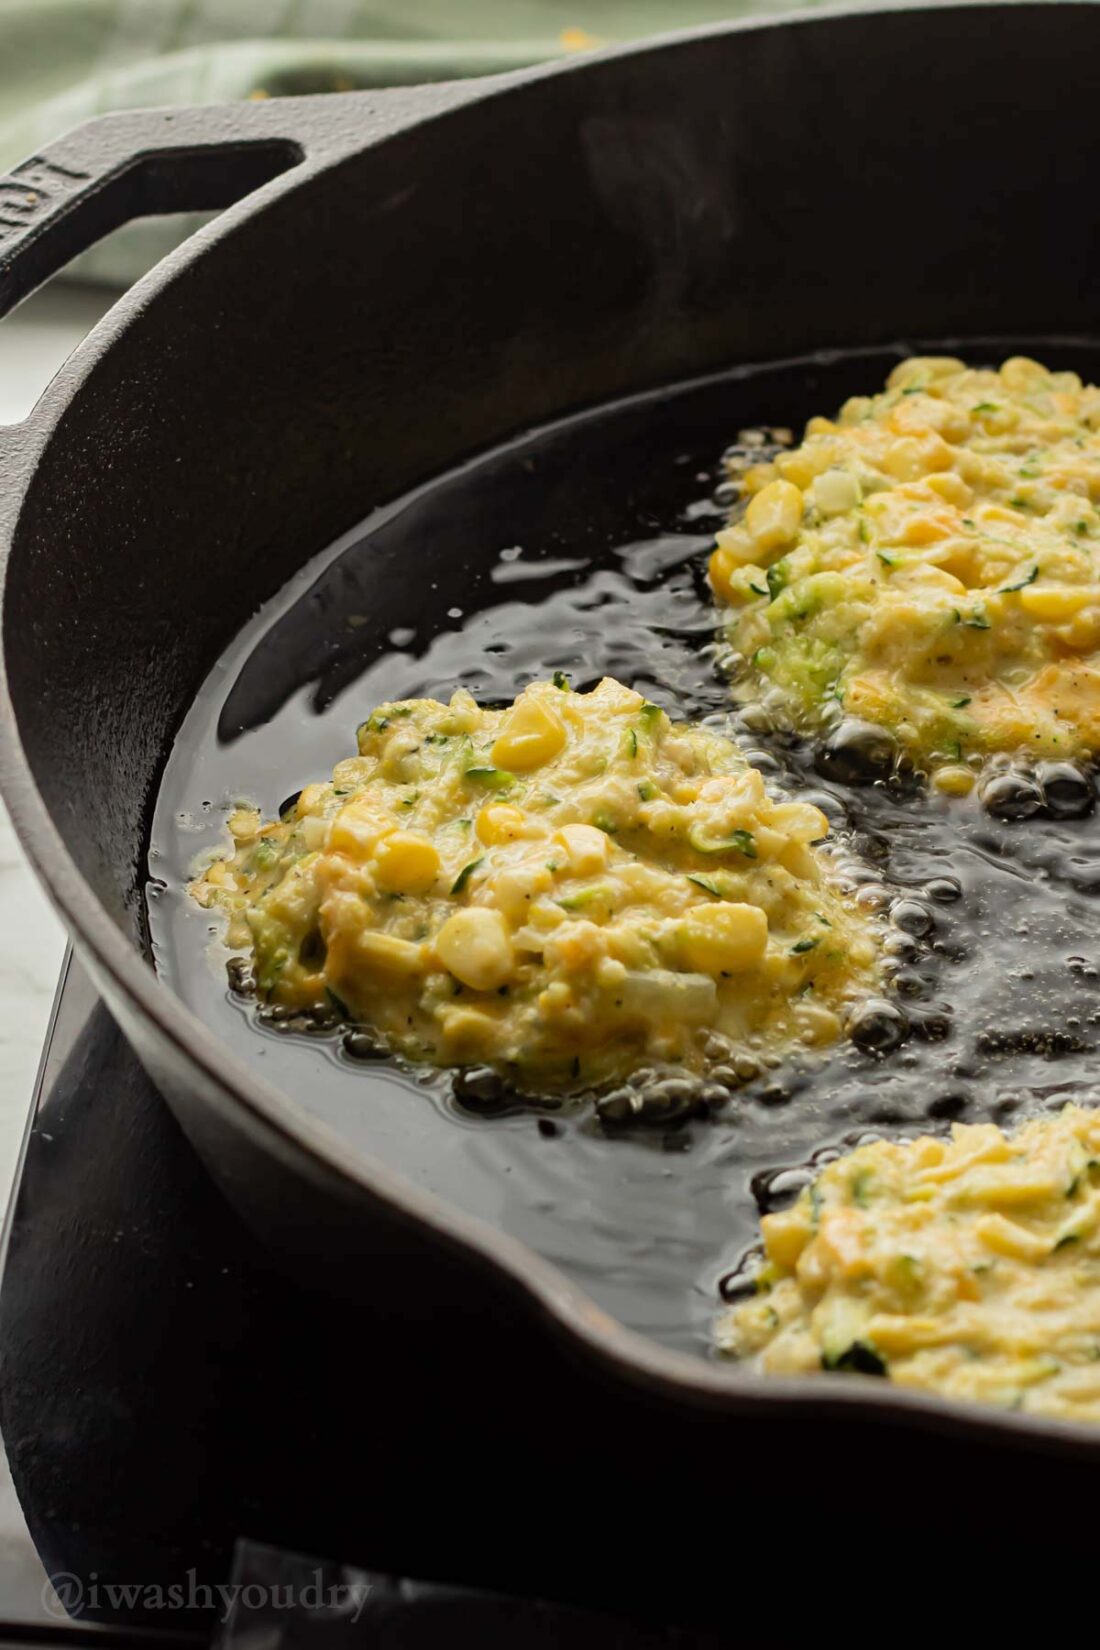 Raw Zucchini Corn Fritter batter in black frying pan with oil. 